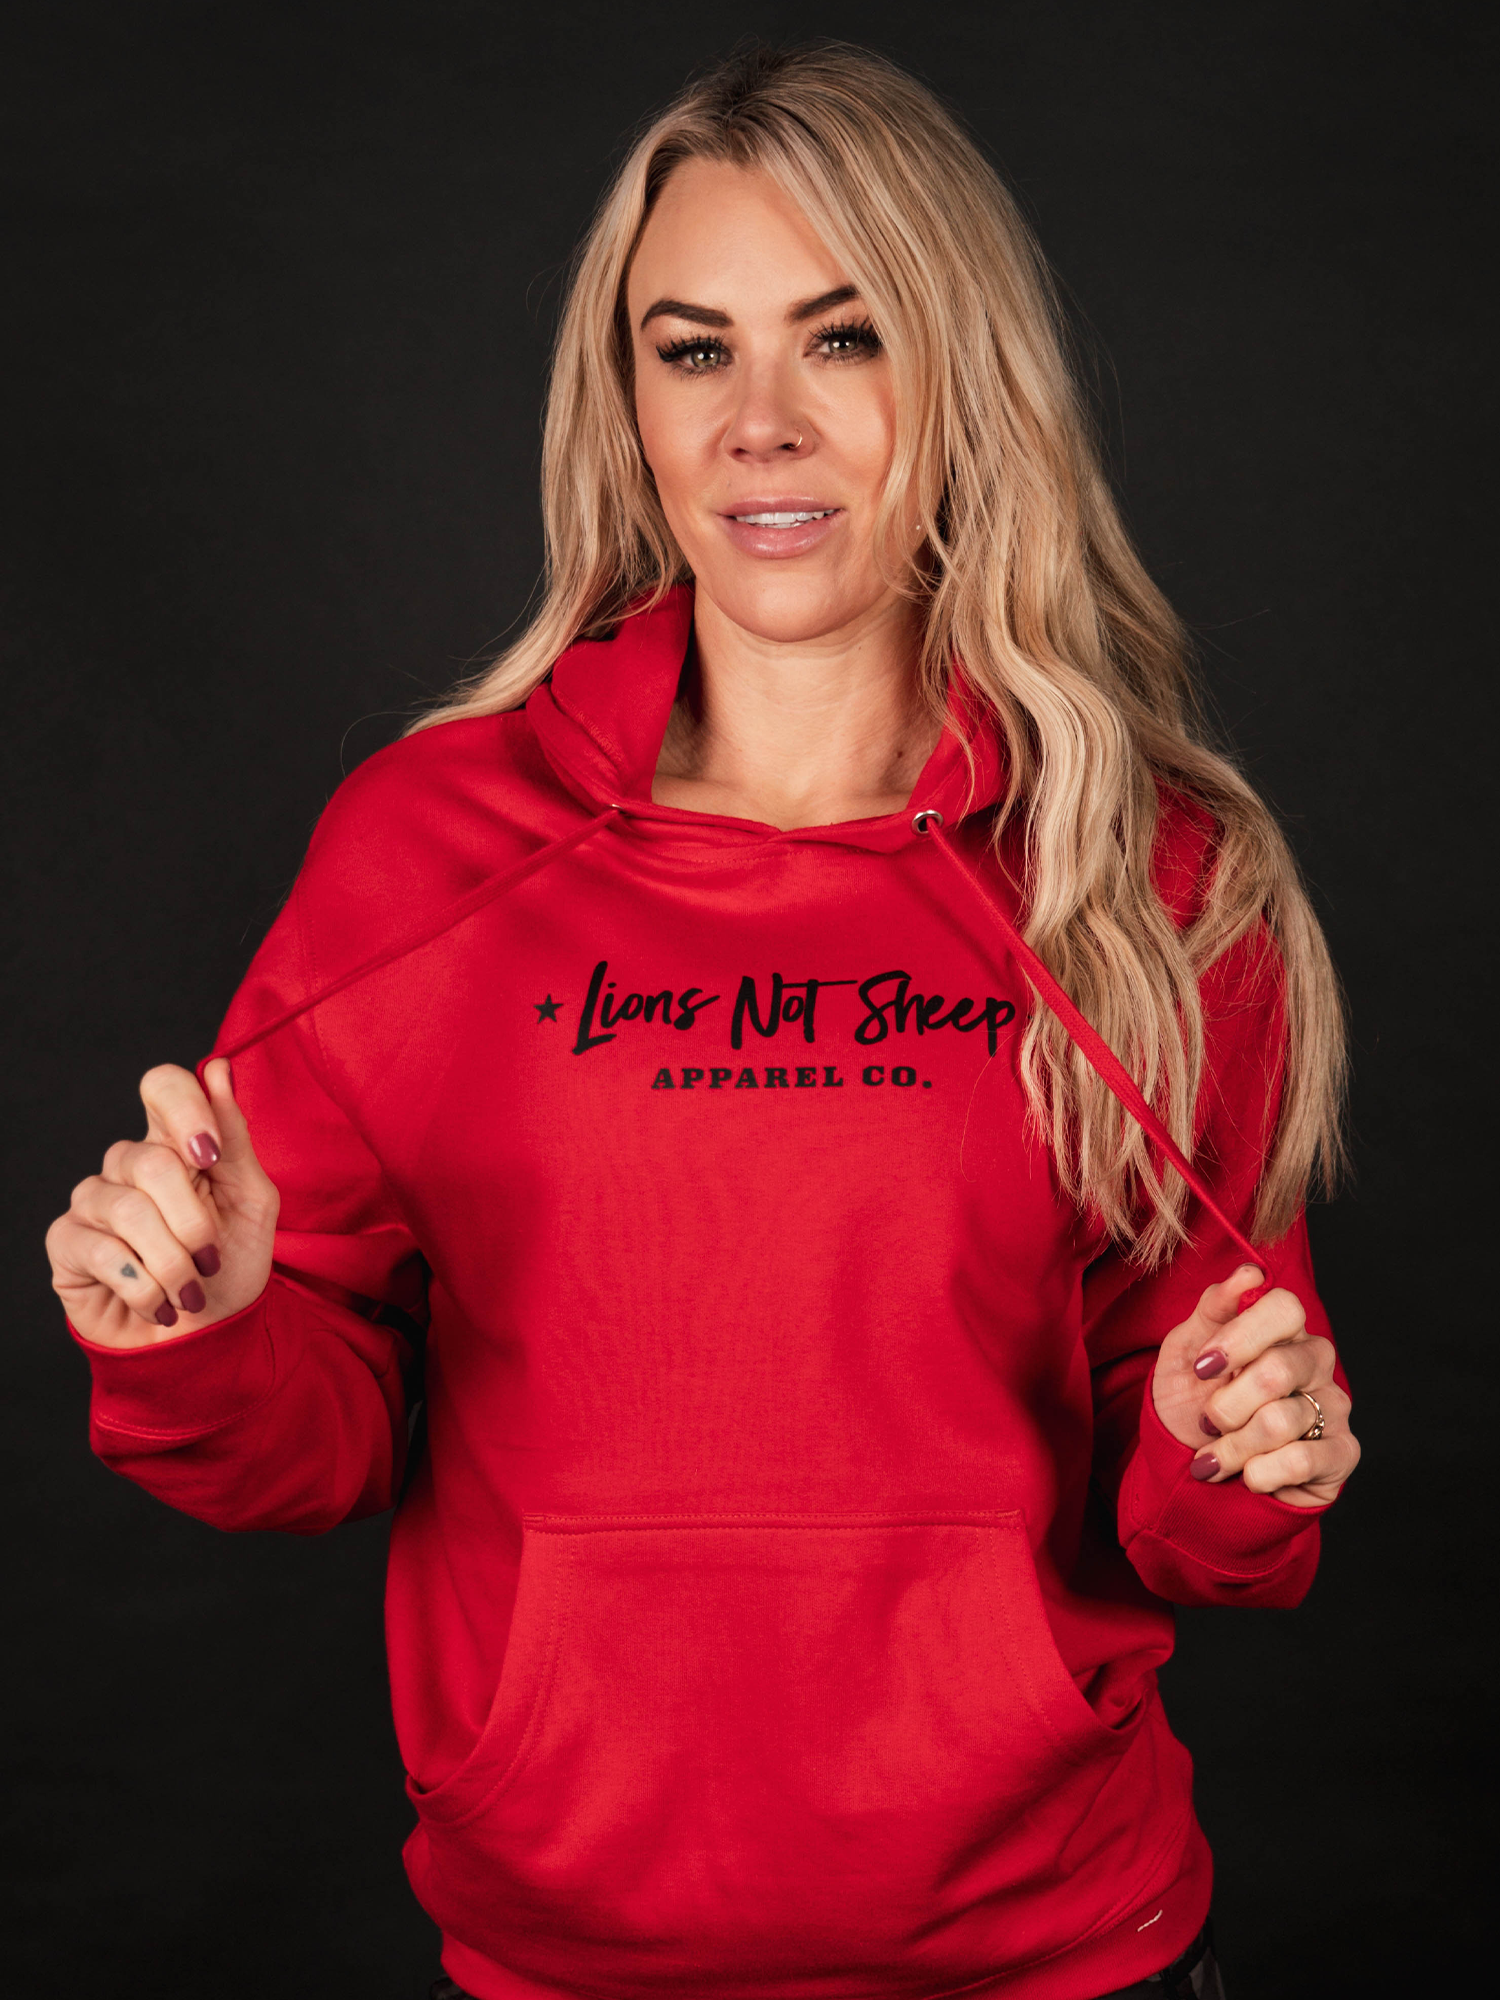 LIONS NOT SHEEP APPAREL CO. Pullover Unisex Hoodie (Red) - Lions Not Sheep ®